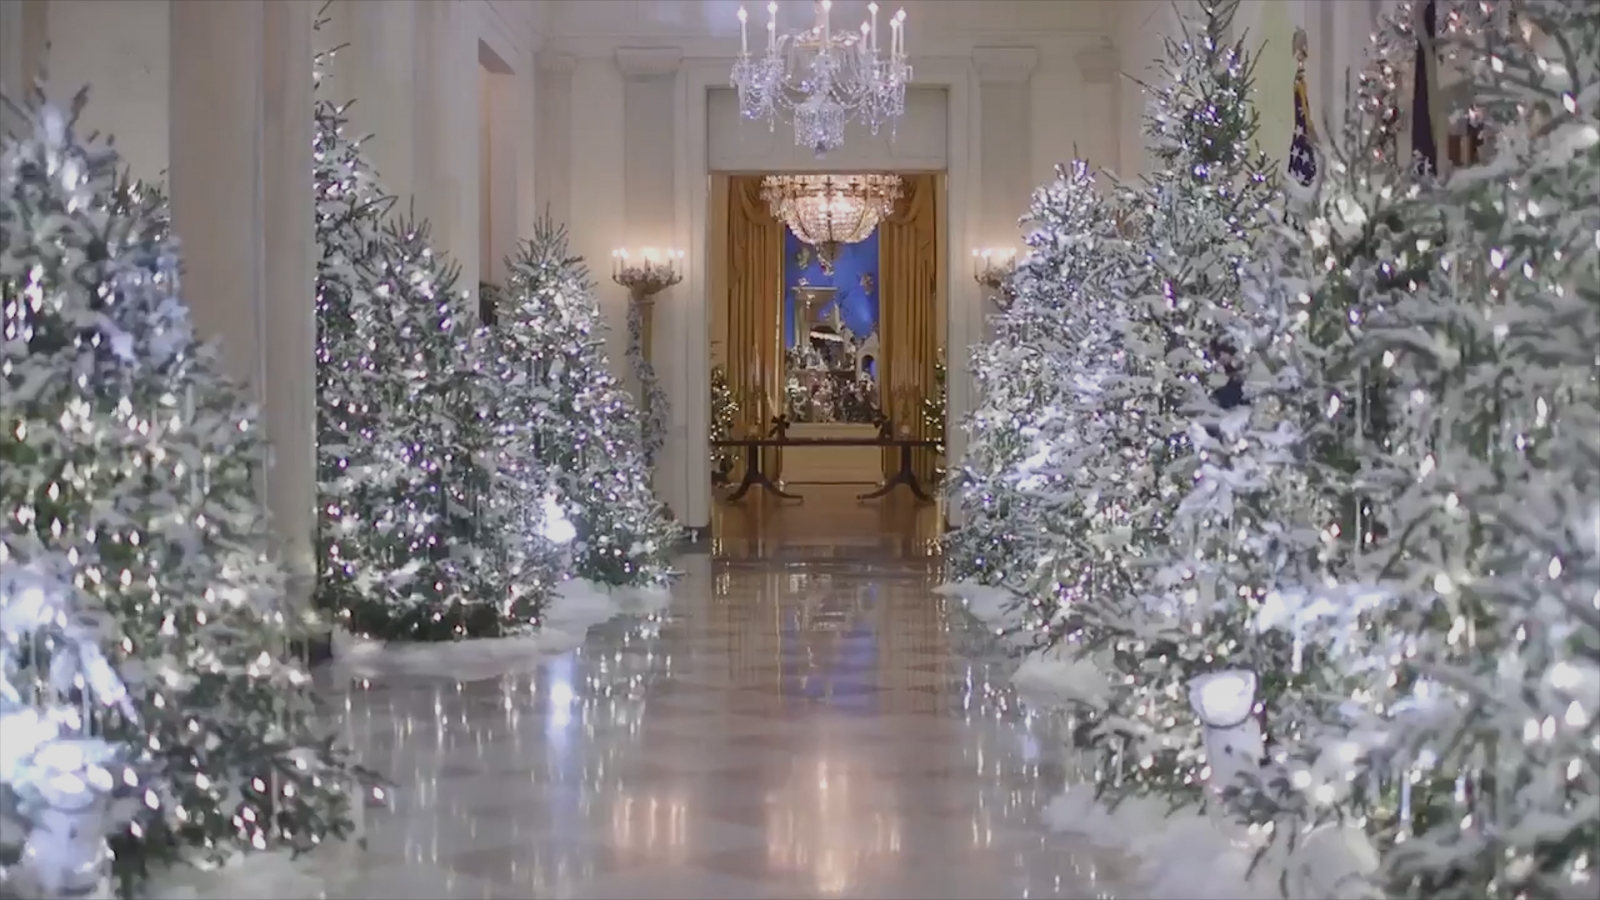 Liberal Media Screams In Horror Over White House Christmas Decorations ...